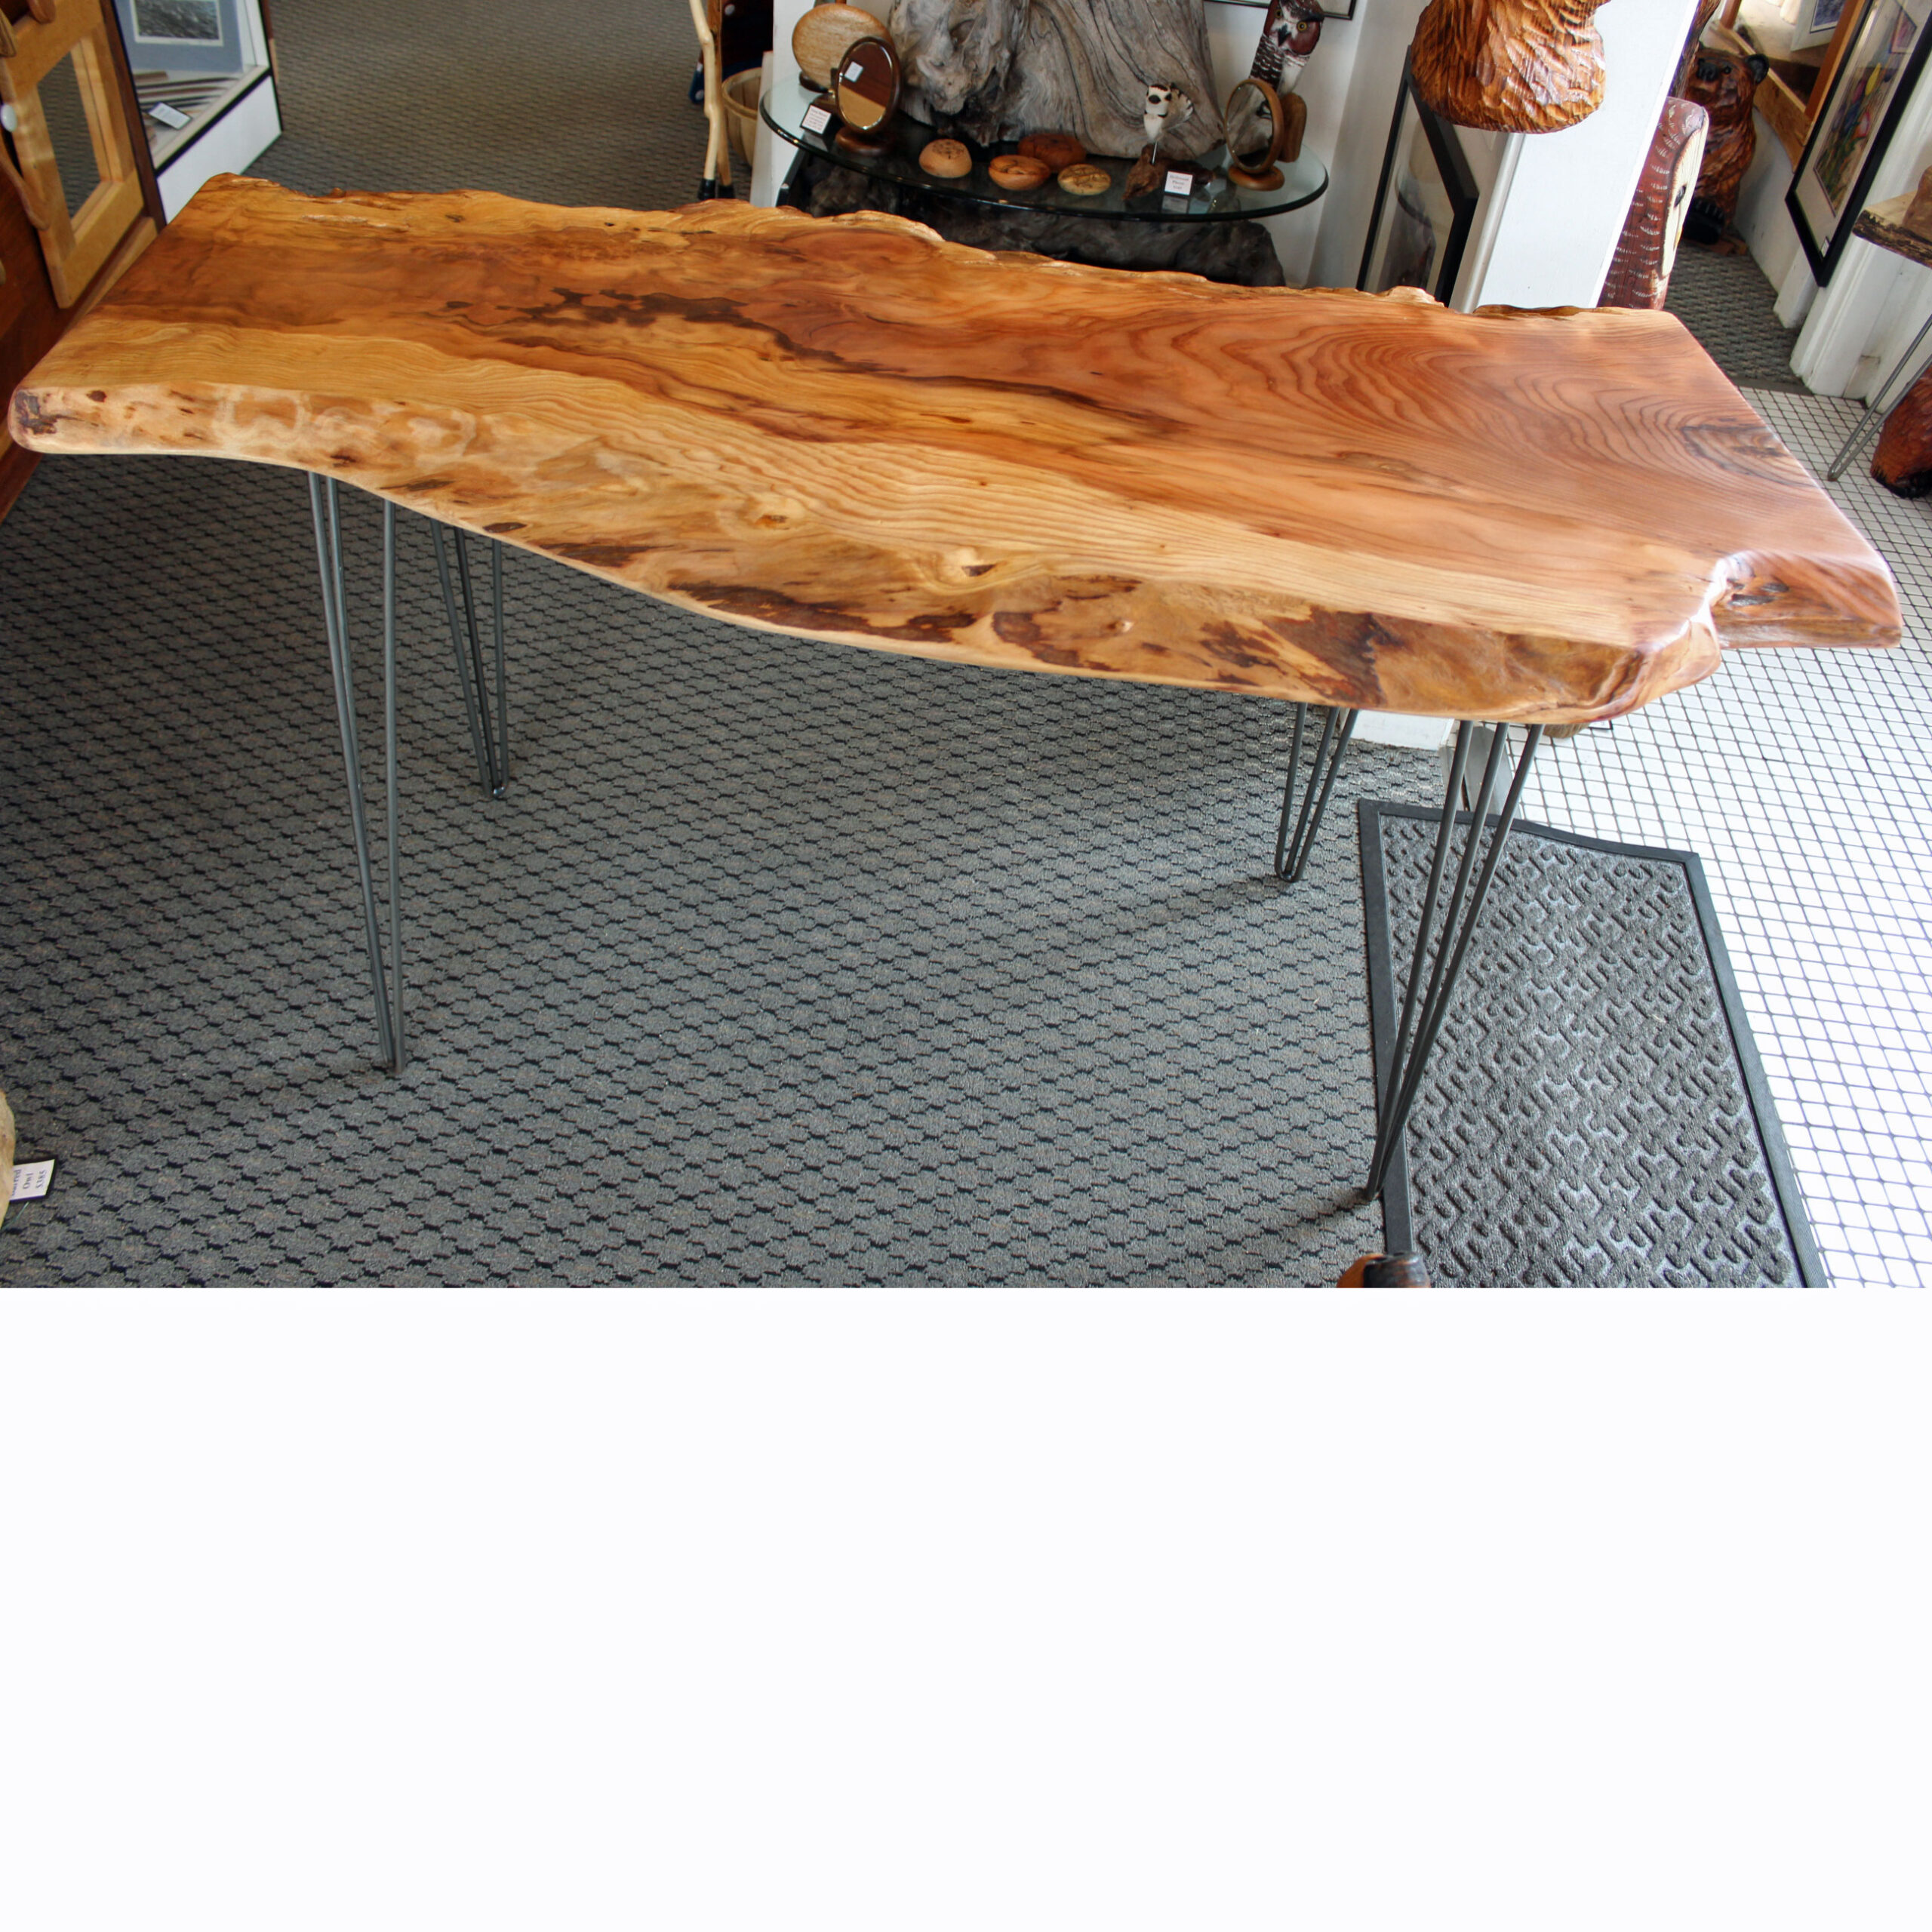 SOLD: Redwood Hall Table with Sapwood and Heartwood